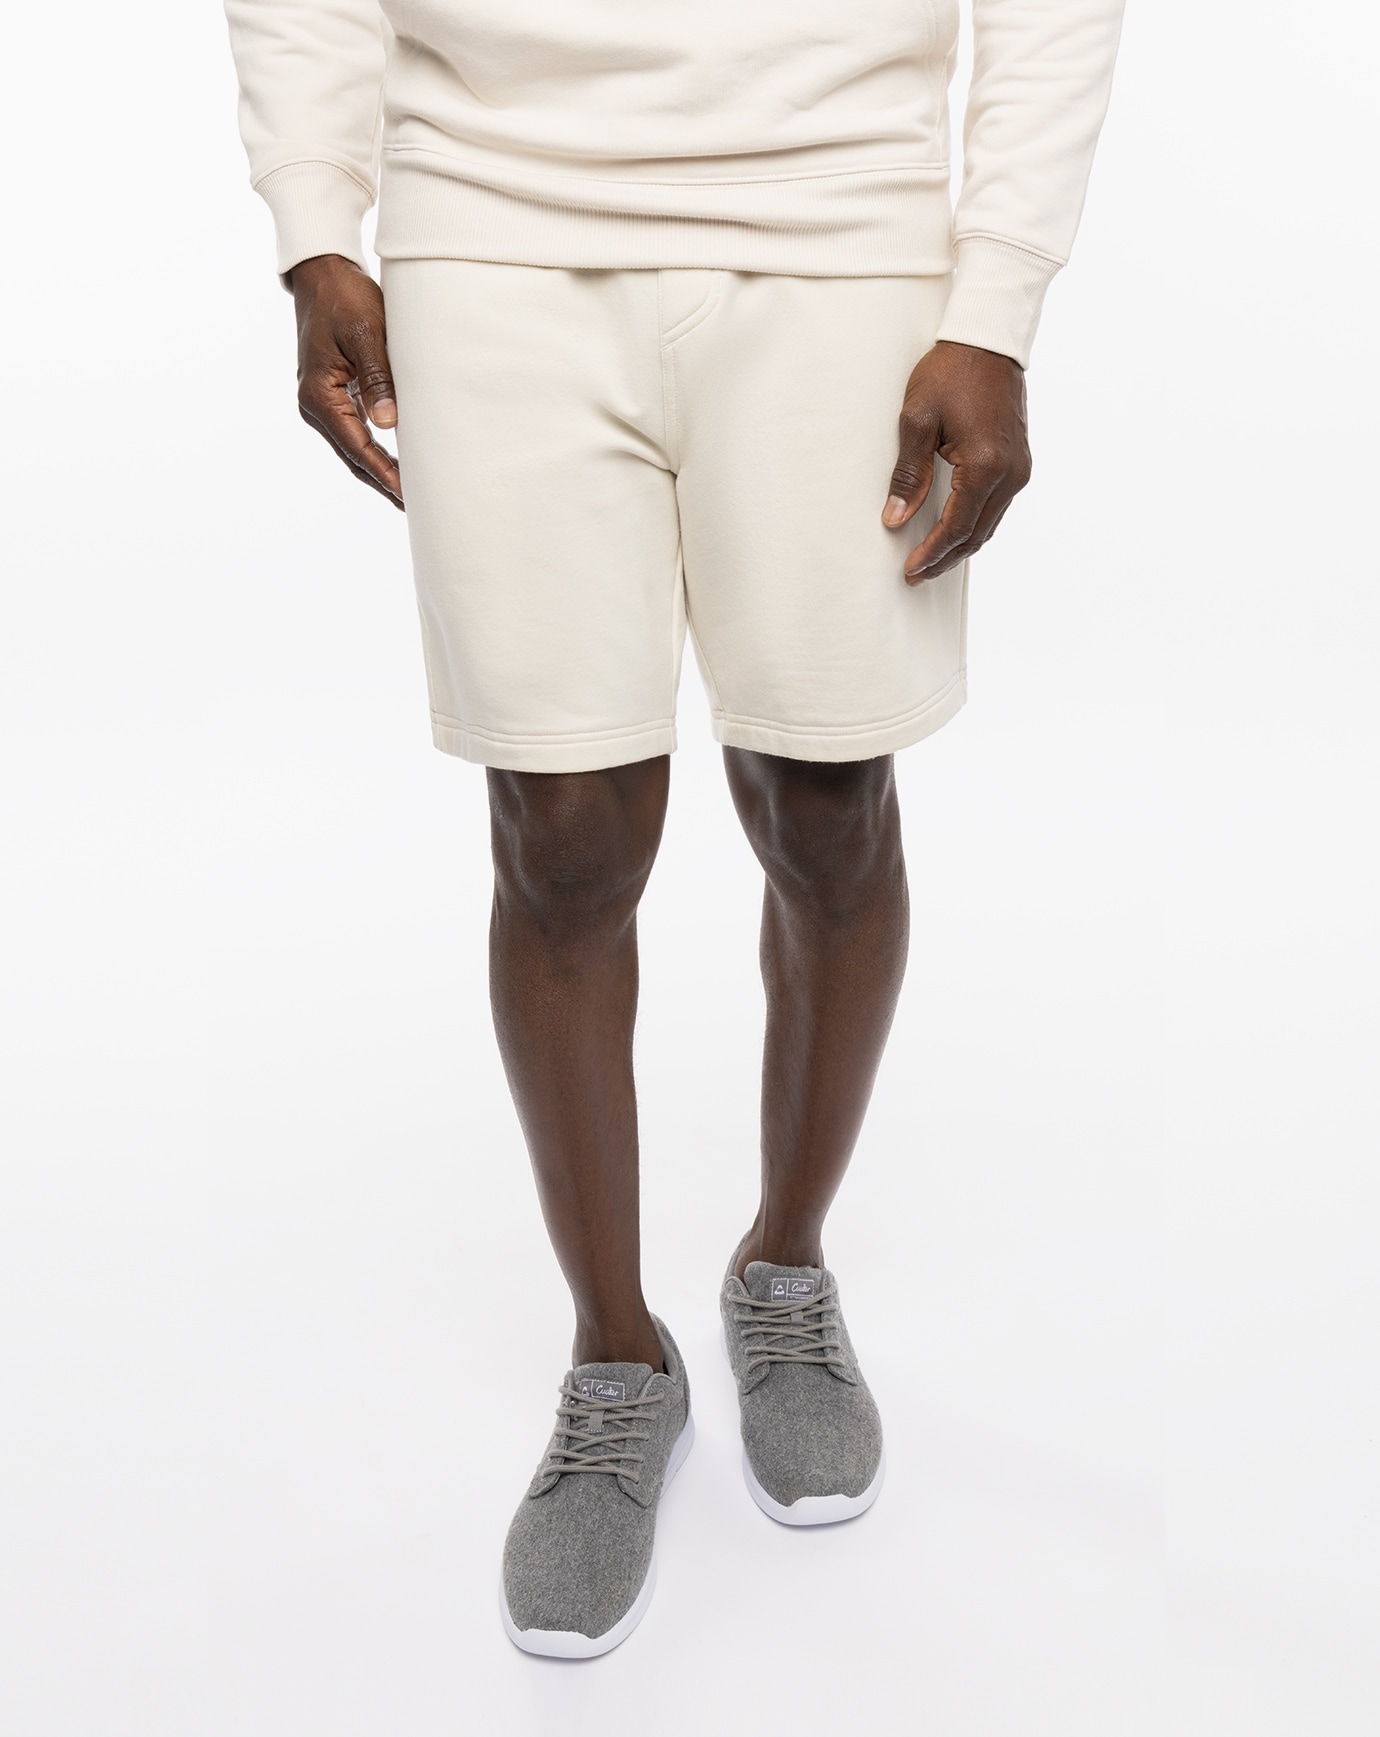 Related Product - COASTAL CLOUD SHORT 7.5 IN